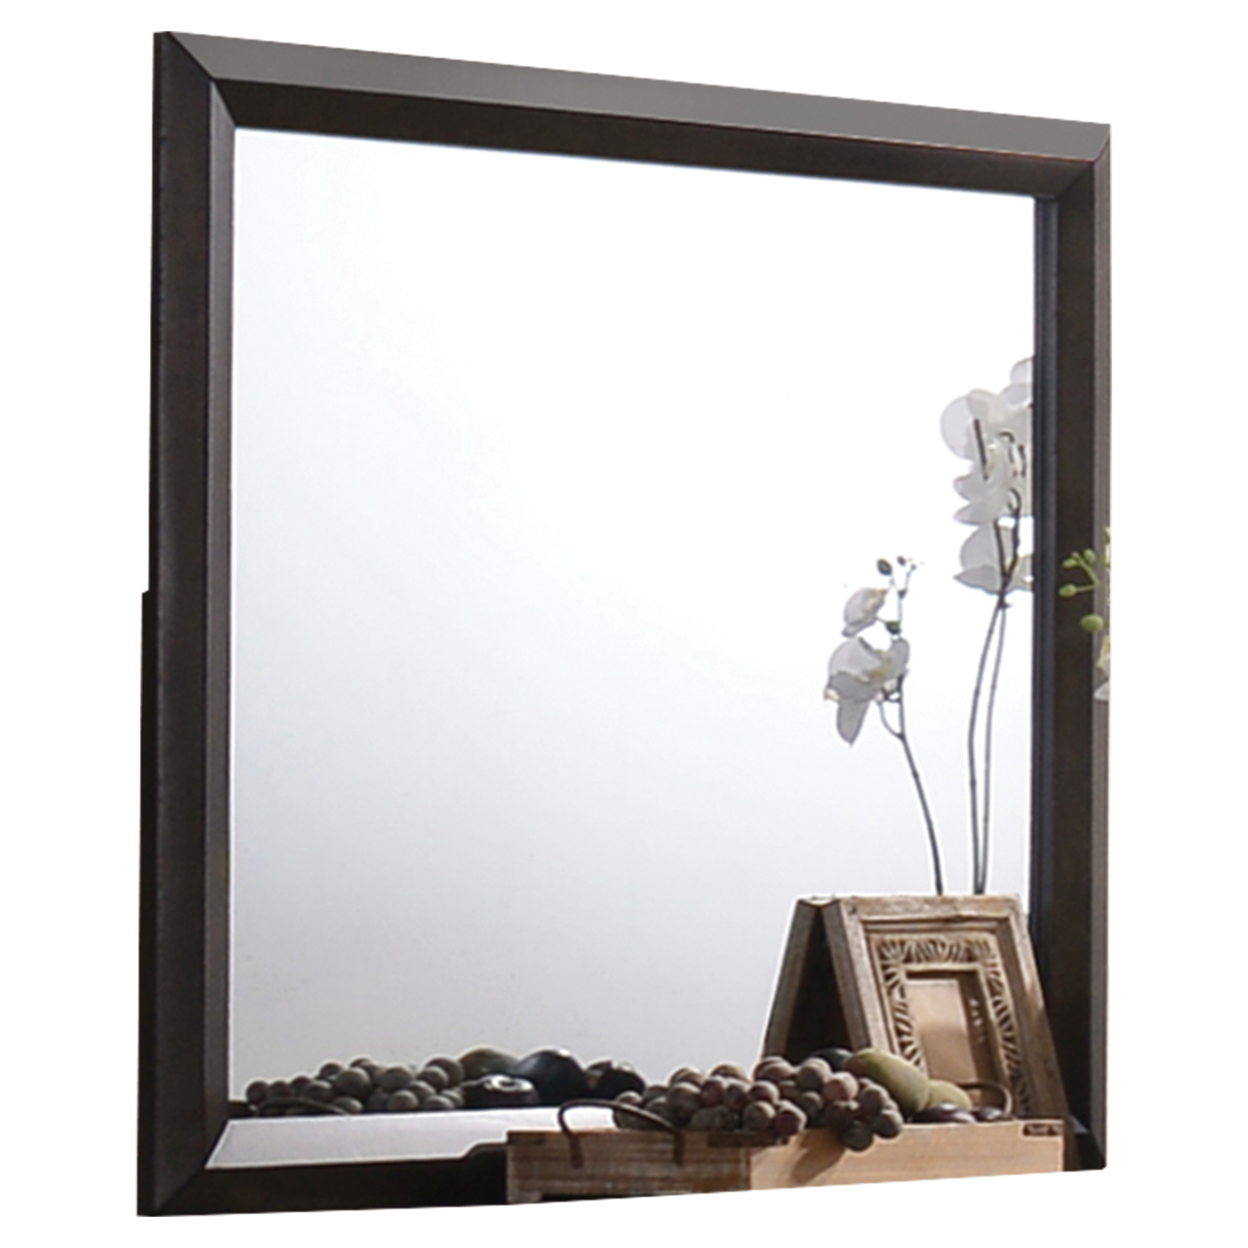 Transition Style Wooden Mirror With Rectangular Shape,Brown And Silver- Saltoro Sherpi